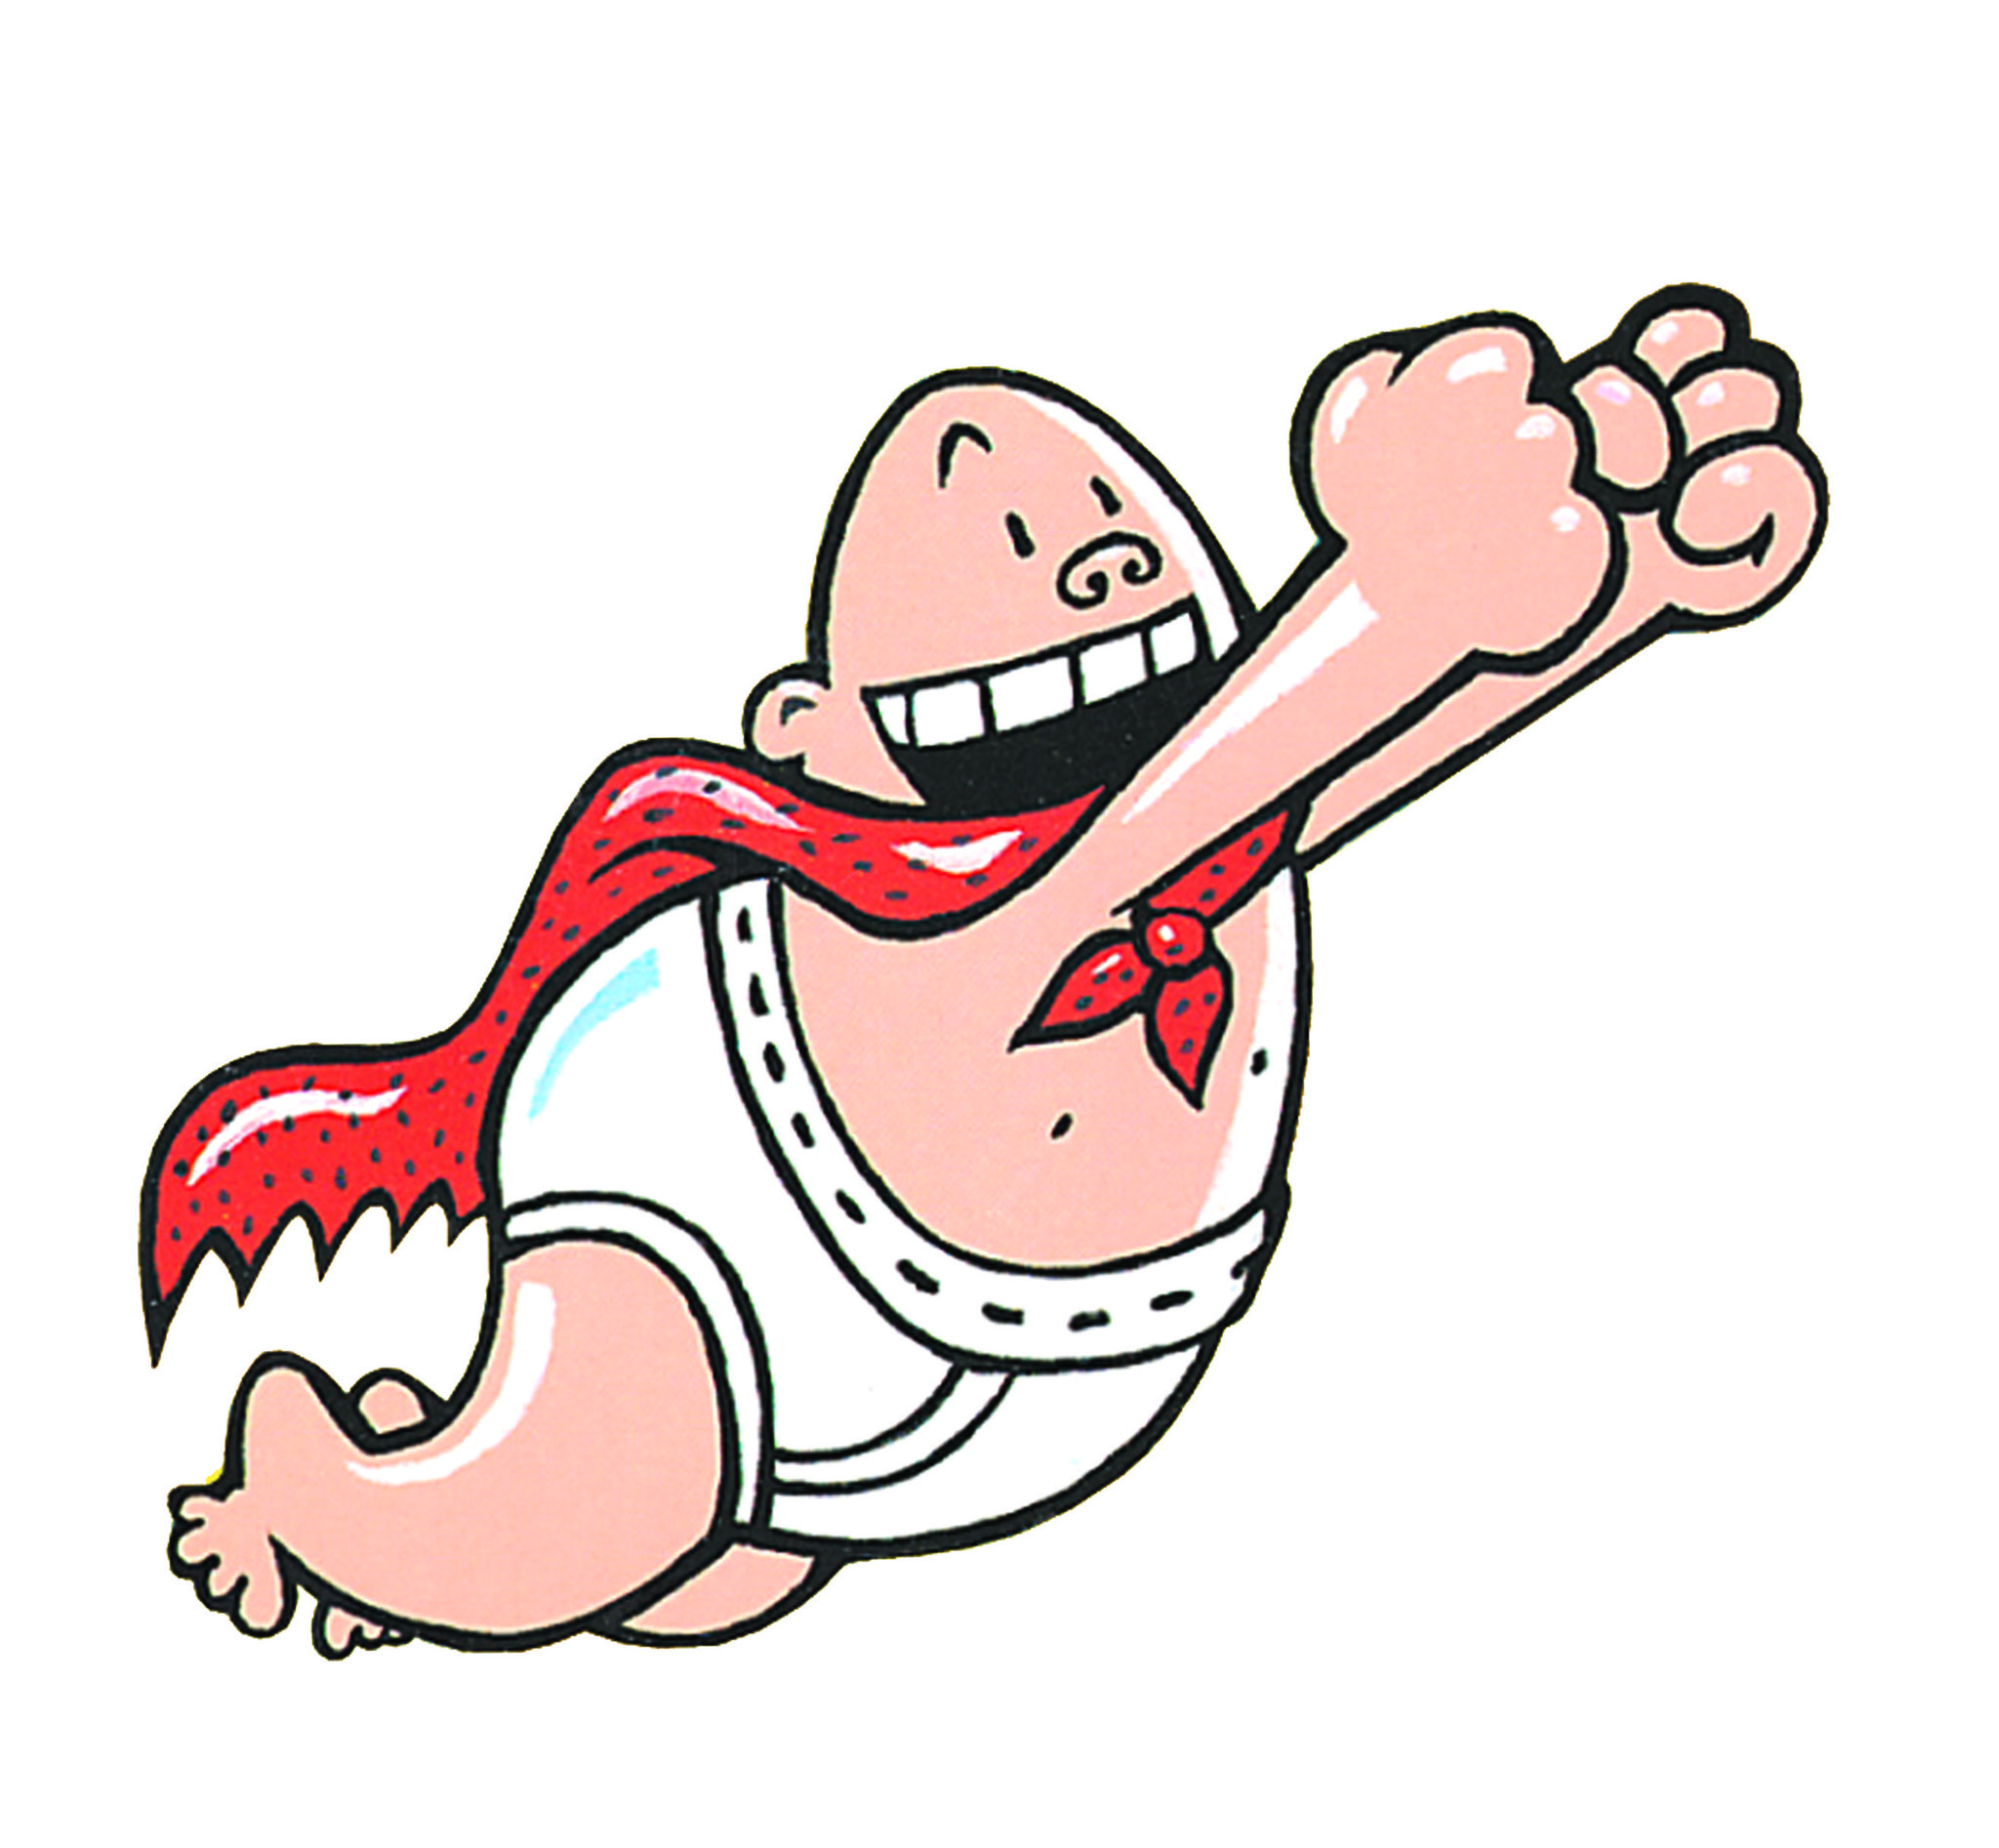 Captain Underpants Wallpapers High Quality | Download Free